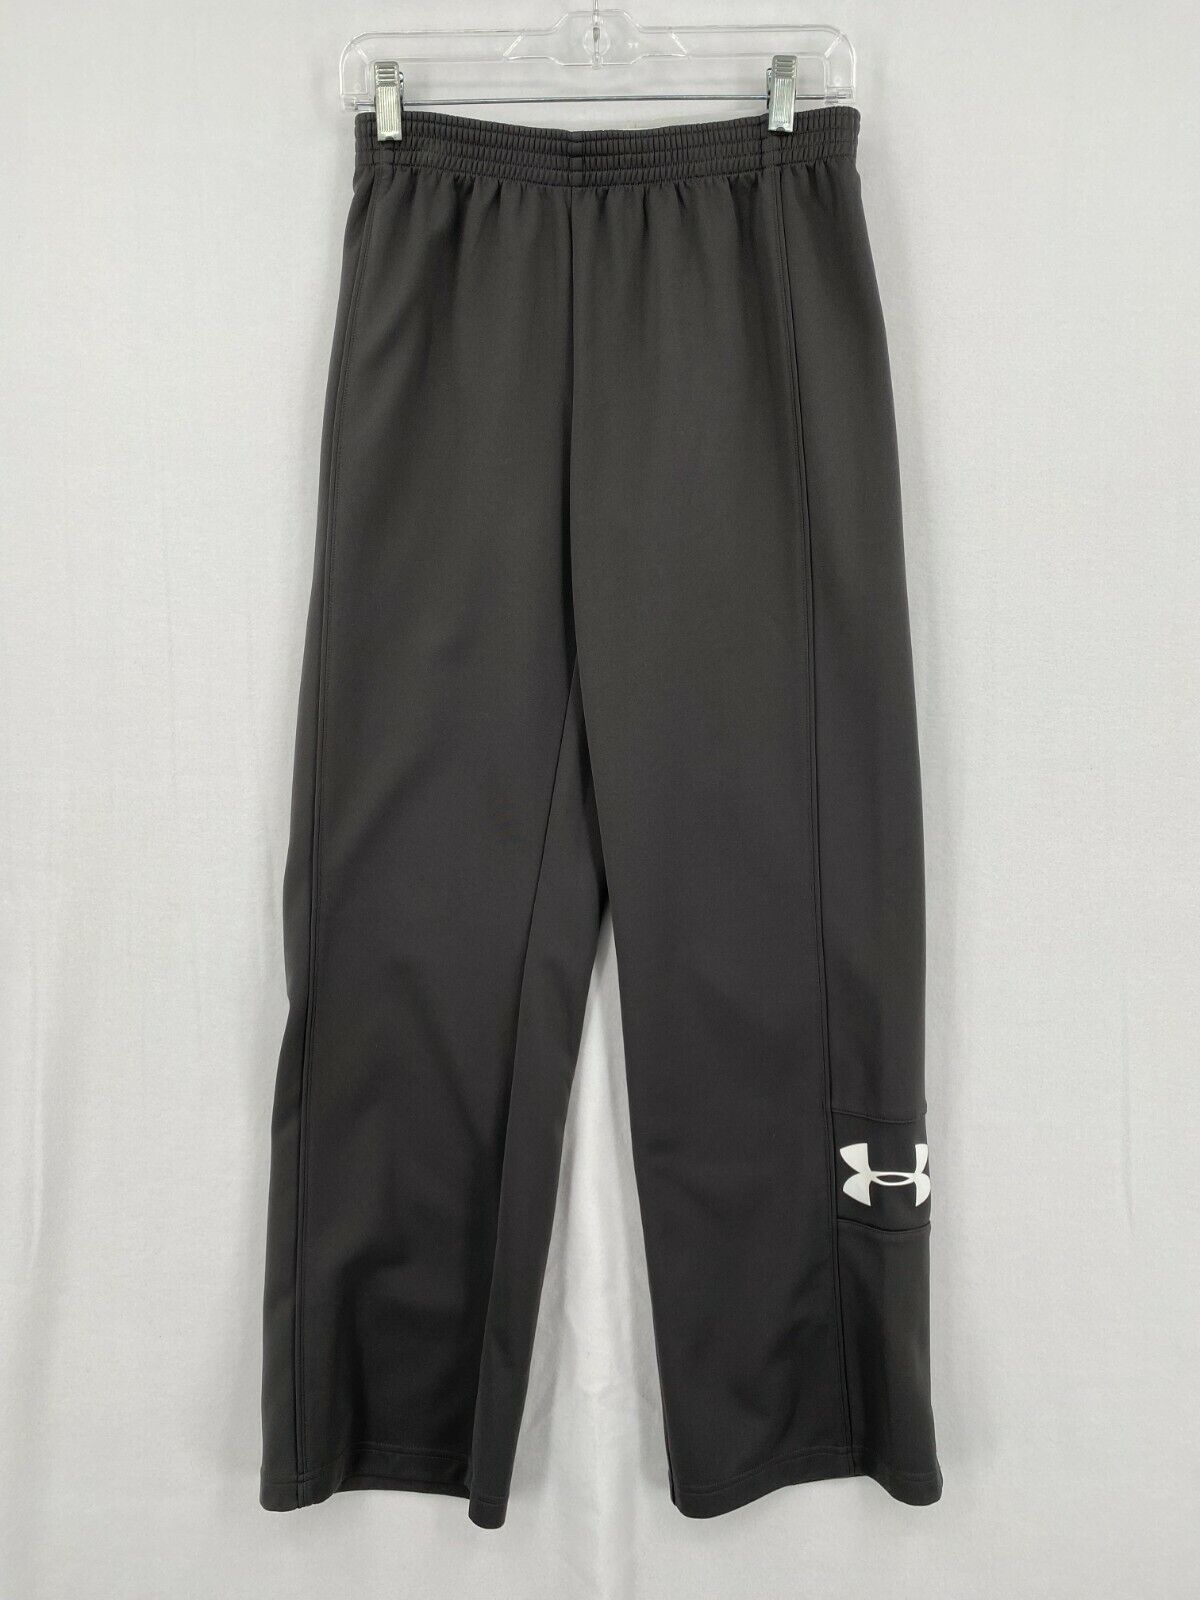 Купить Under Armour Track Suit Pants Size Small Semi Fitted Gray Athleisure  Logo Womens, цена 2 390 руб — (285504598804)